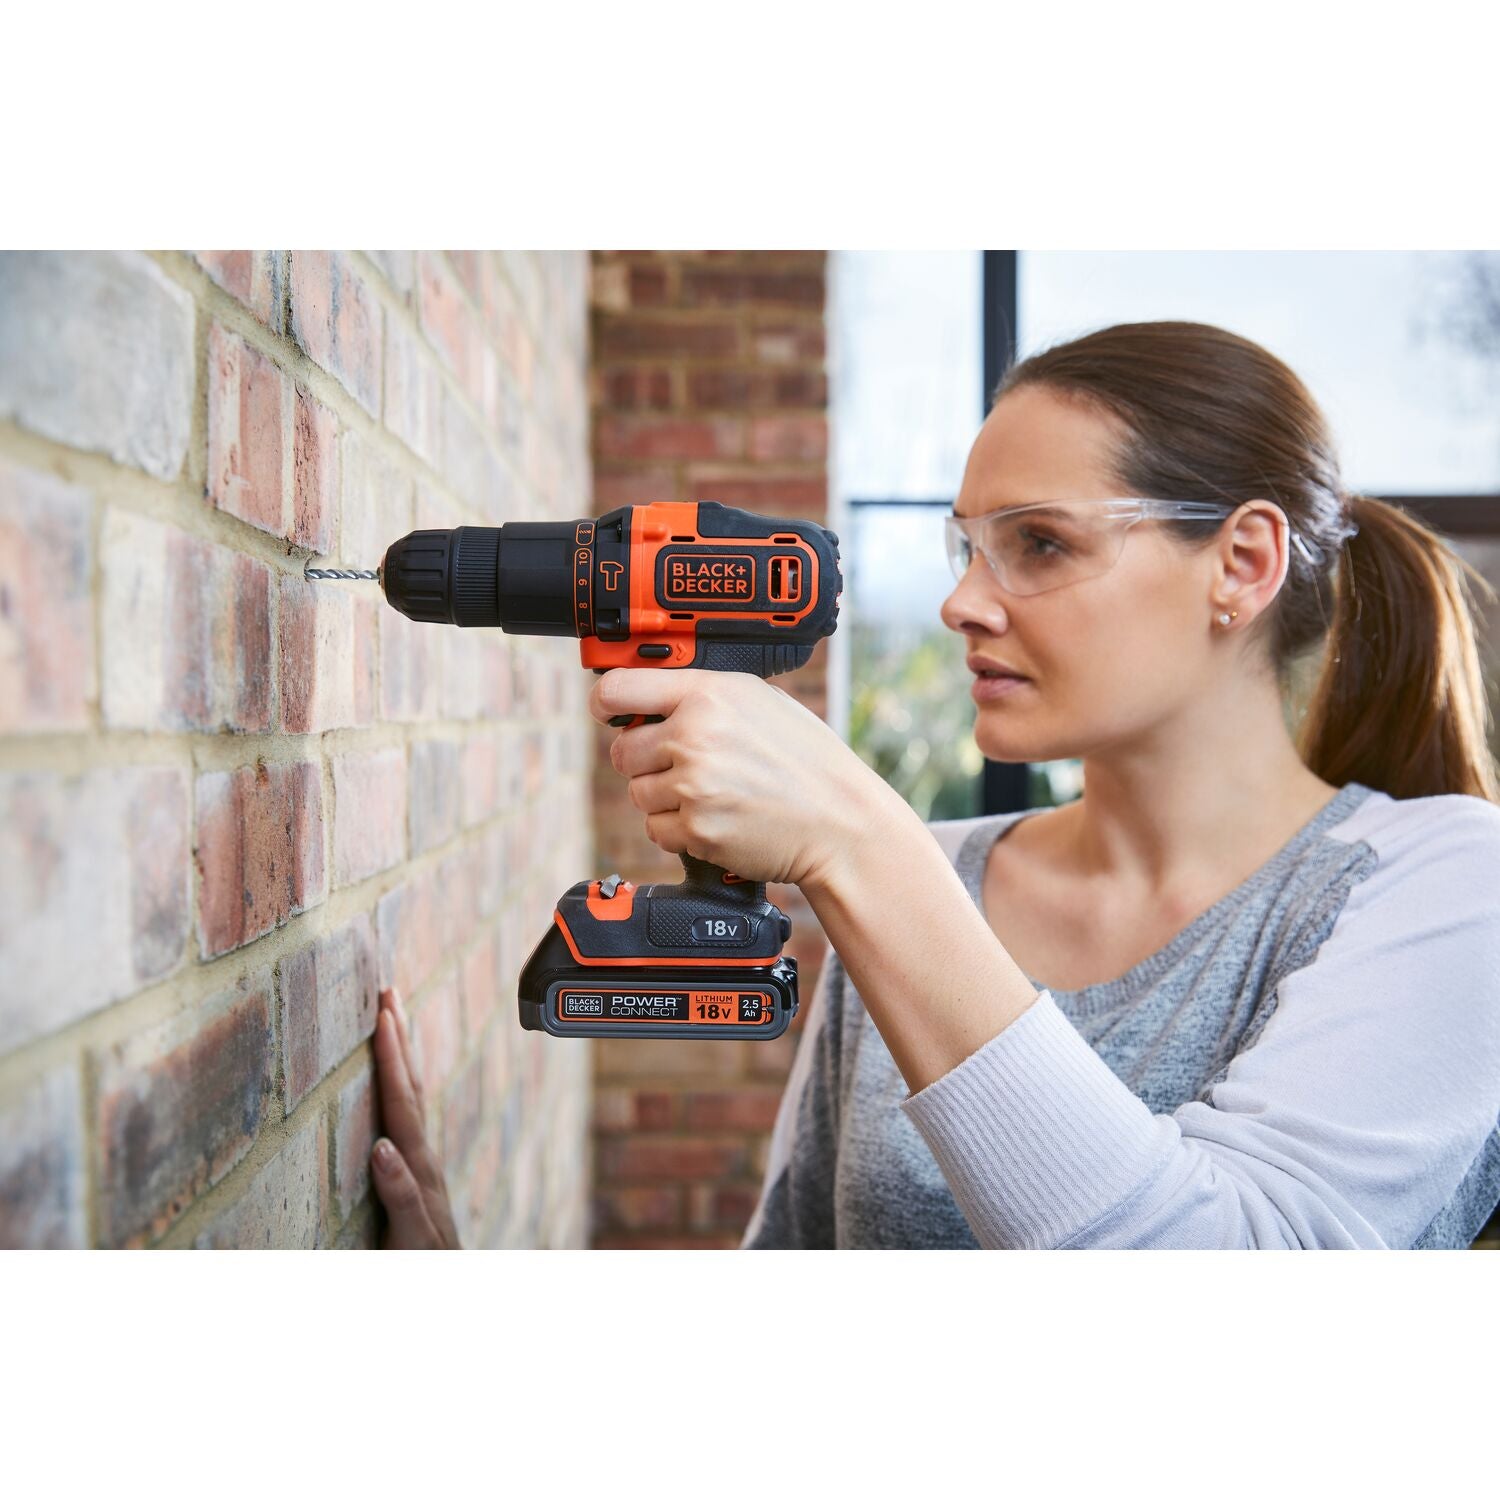 POWER DRILL BLACK&amp;DECKER 18V WITH 2 X 1.5AH BATTERIES WITH 16 INCH CASE AND DRILL BIT SET